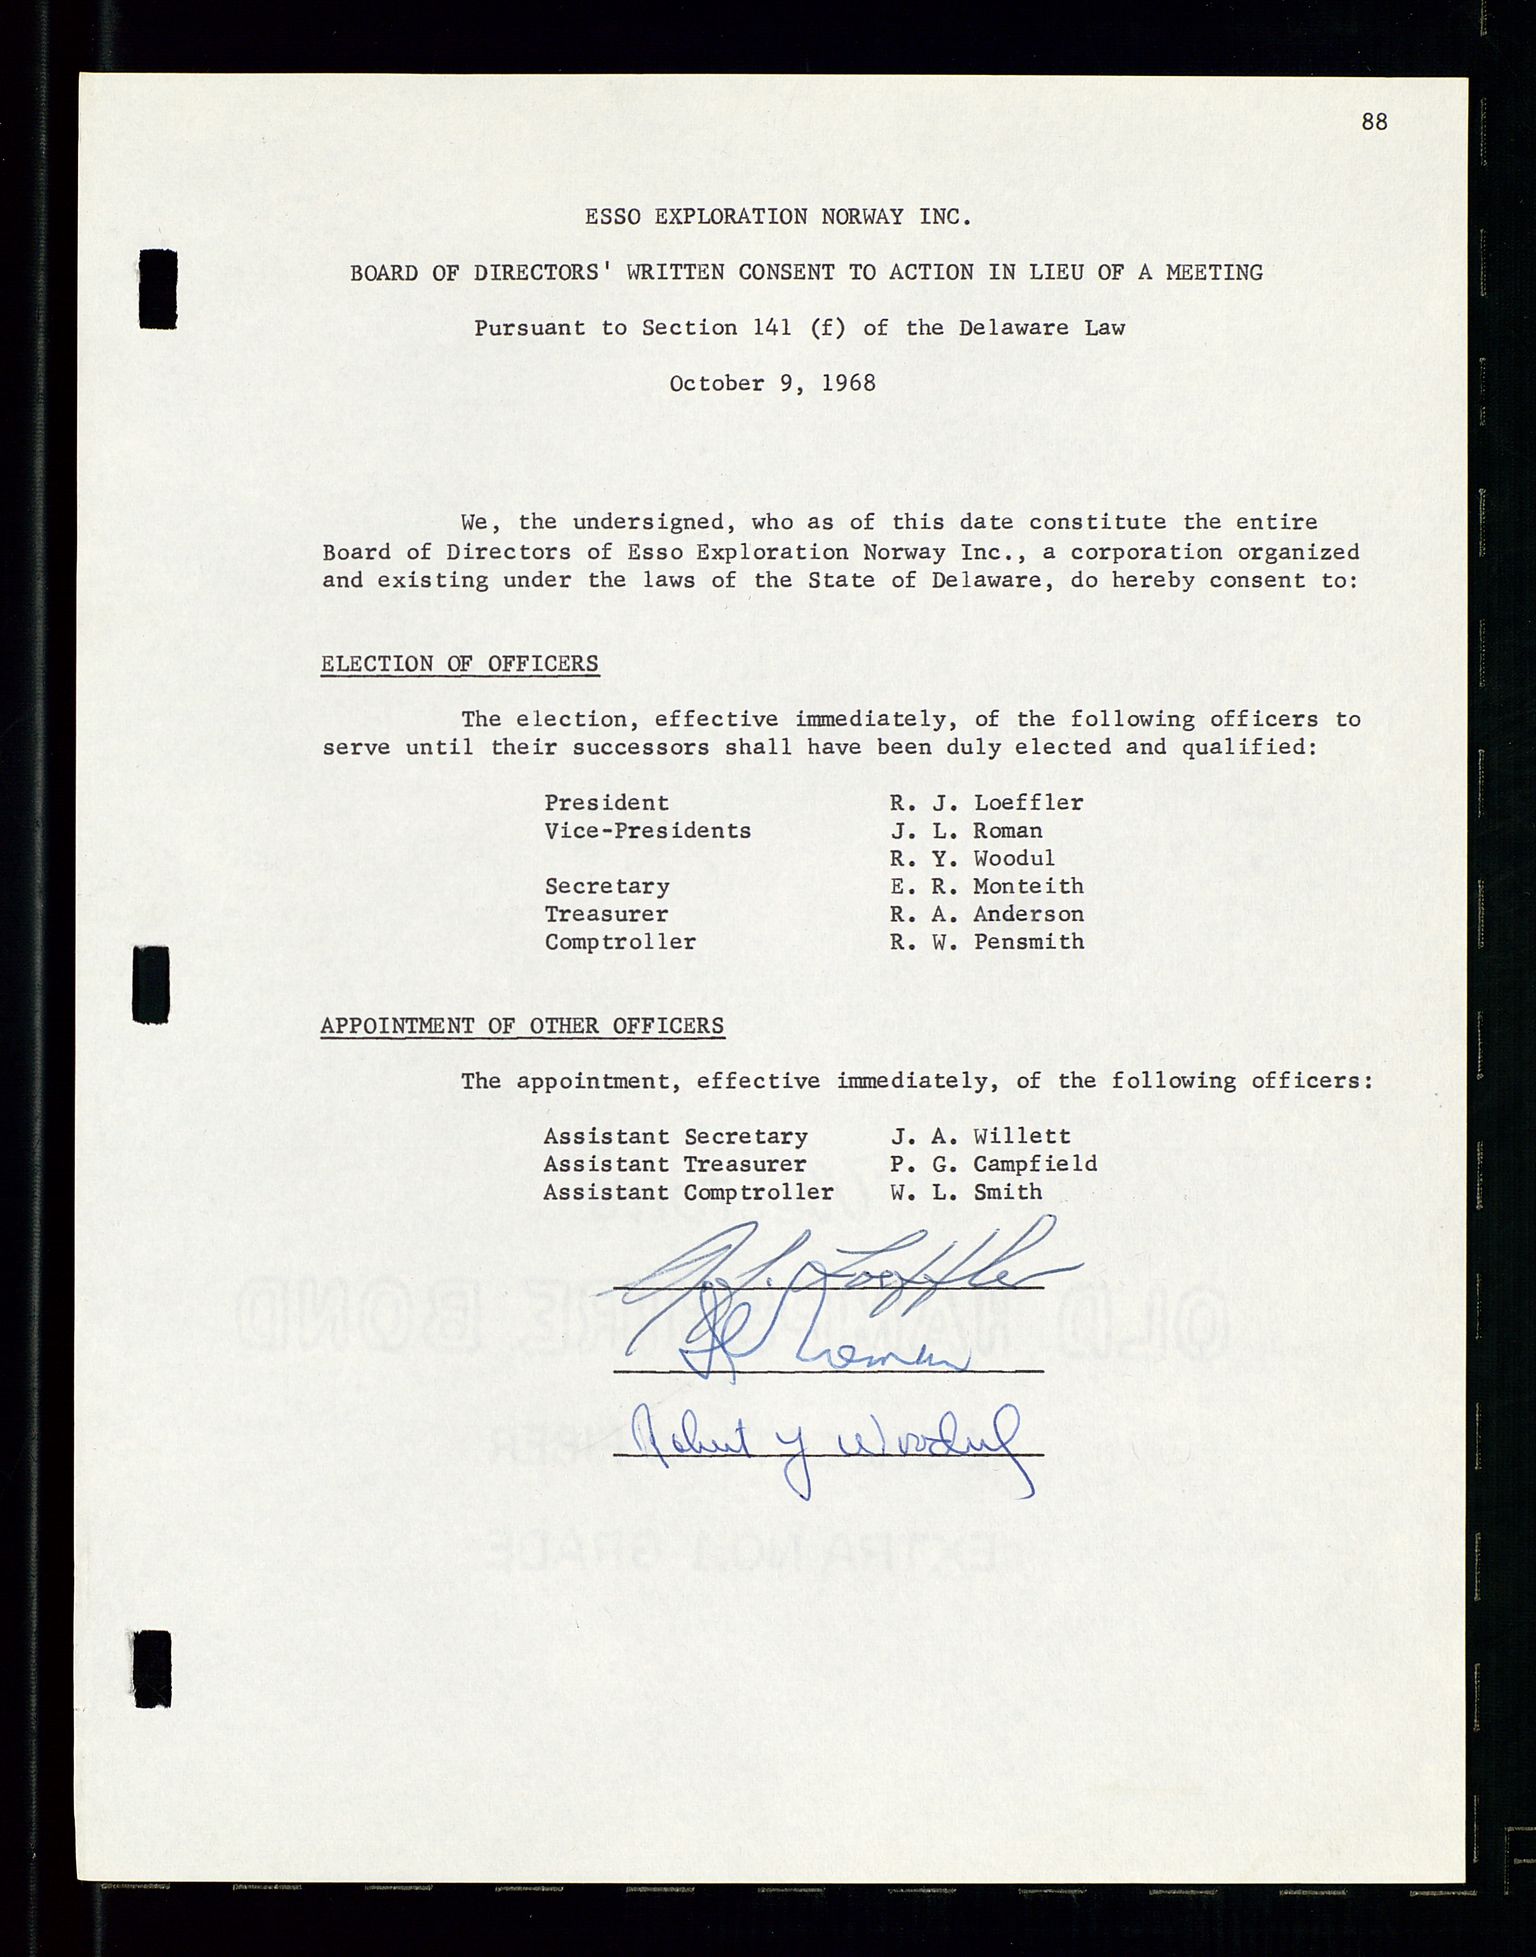 Pa 1512 - Esso Exploration and Production Norway Inc., SAST/A-101917/A/Aa/L0001/0001: Styredokumenter / Corporate records, By-Laws, Board meeting minutes, Incorporations, 1965-1975, s. 88